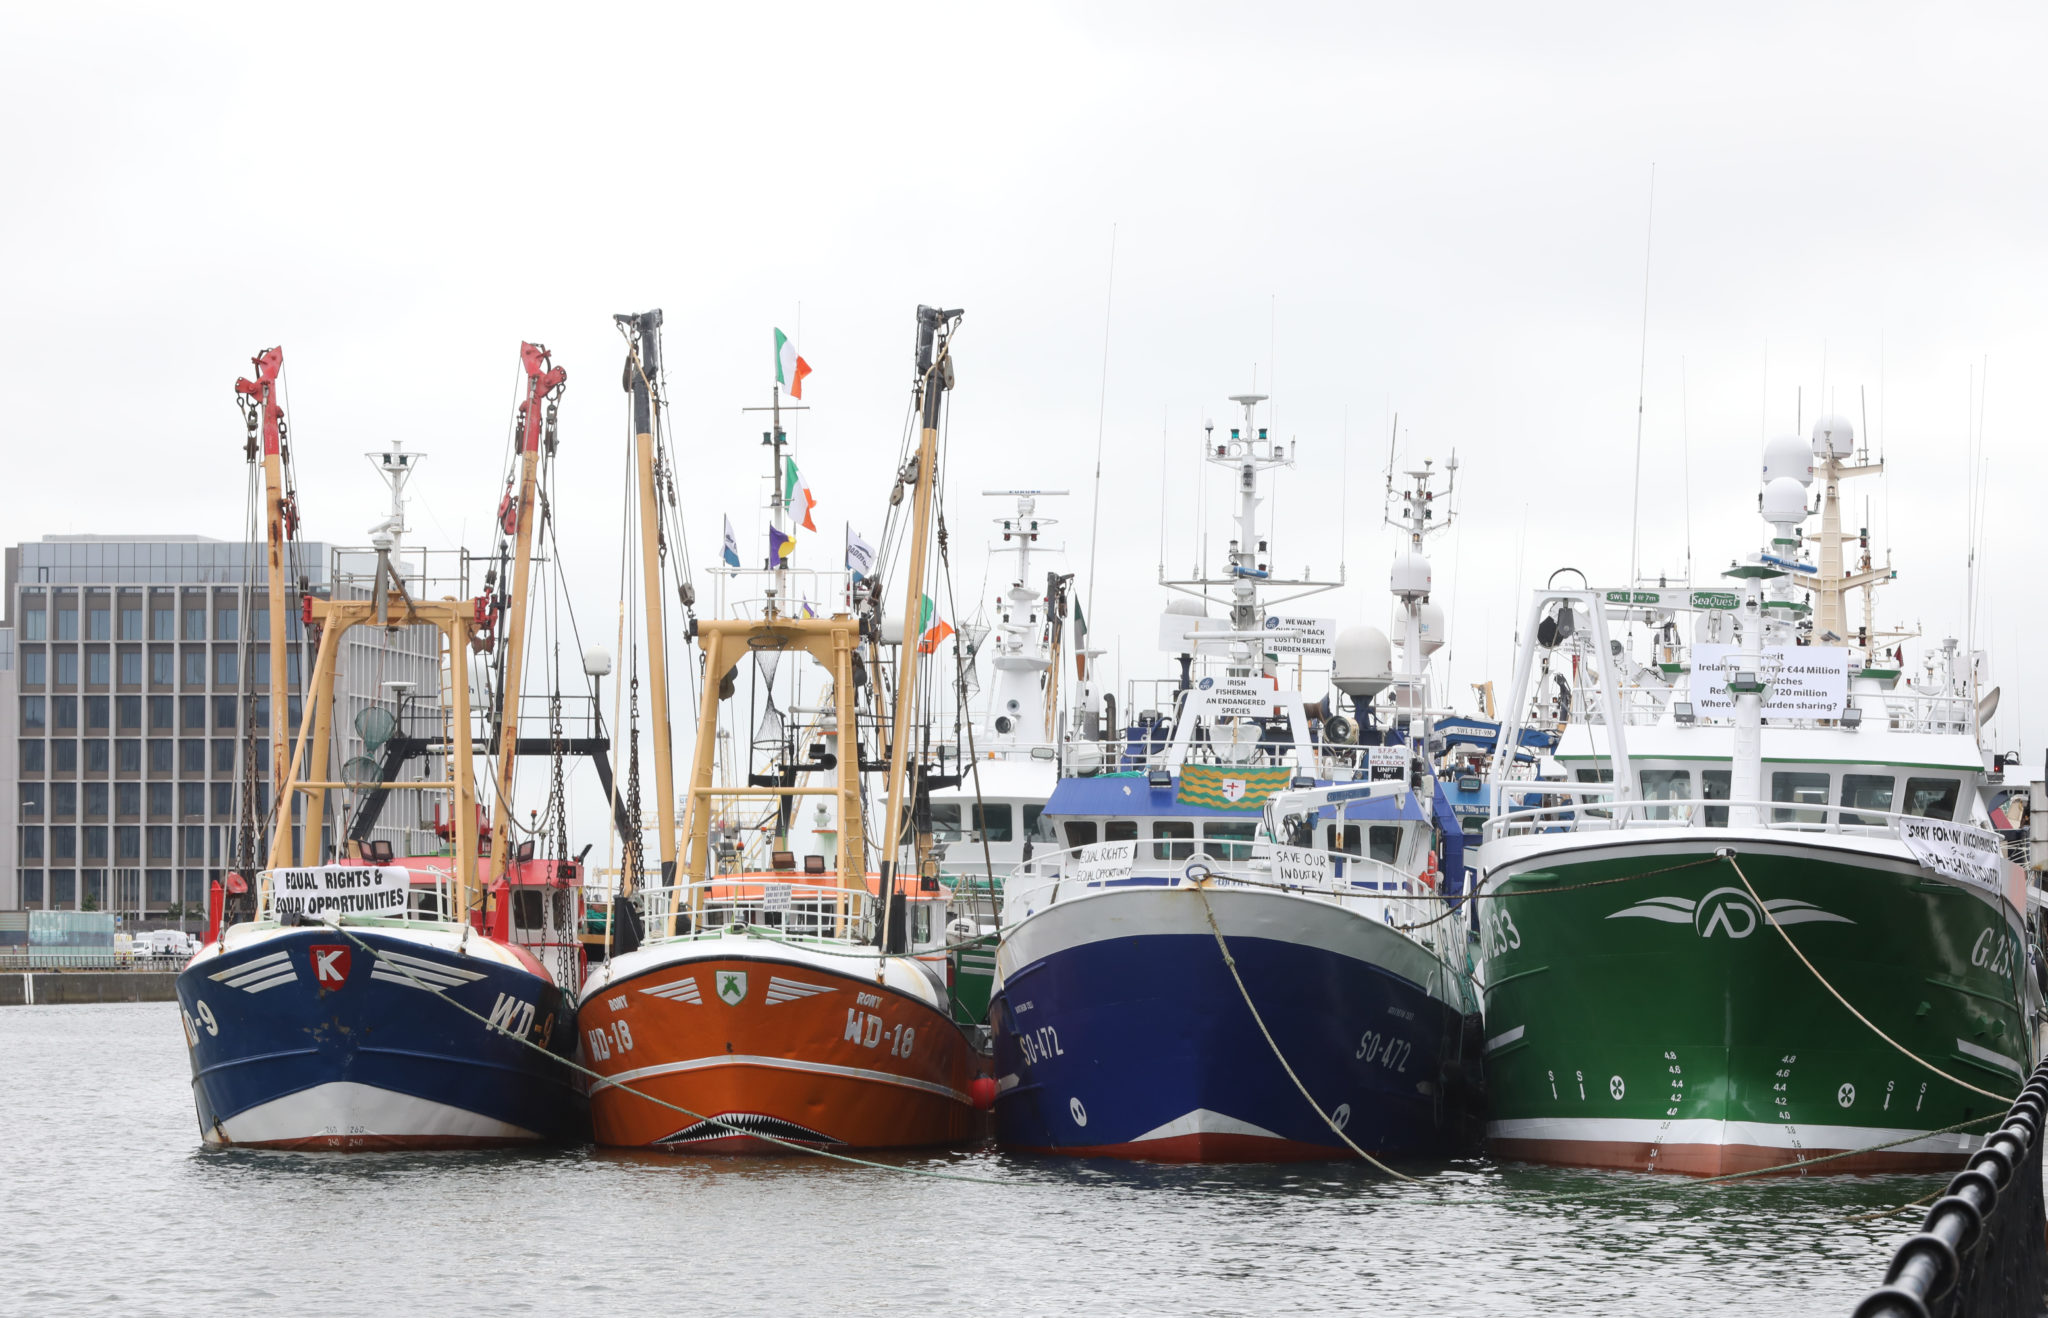 Pictured are trawlers on the River Liffey in Dublin